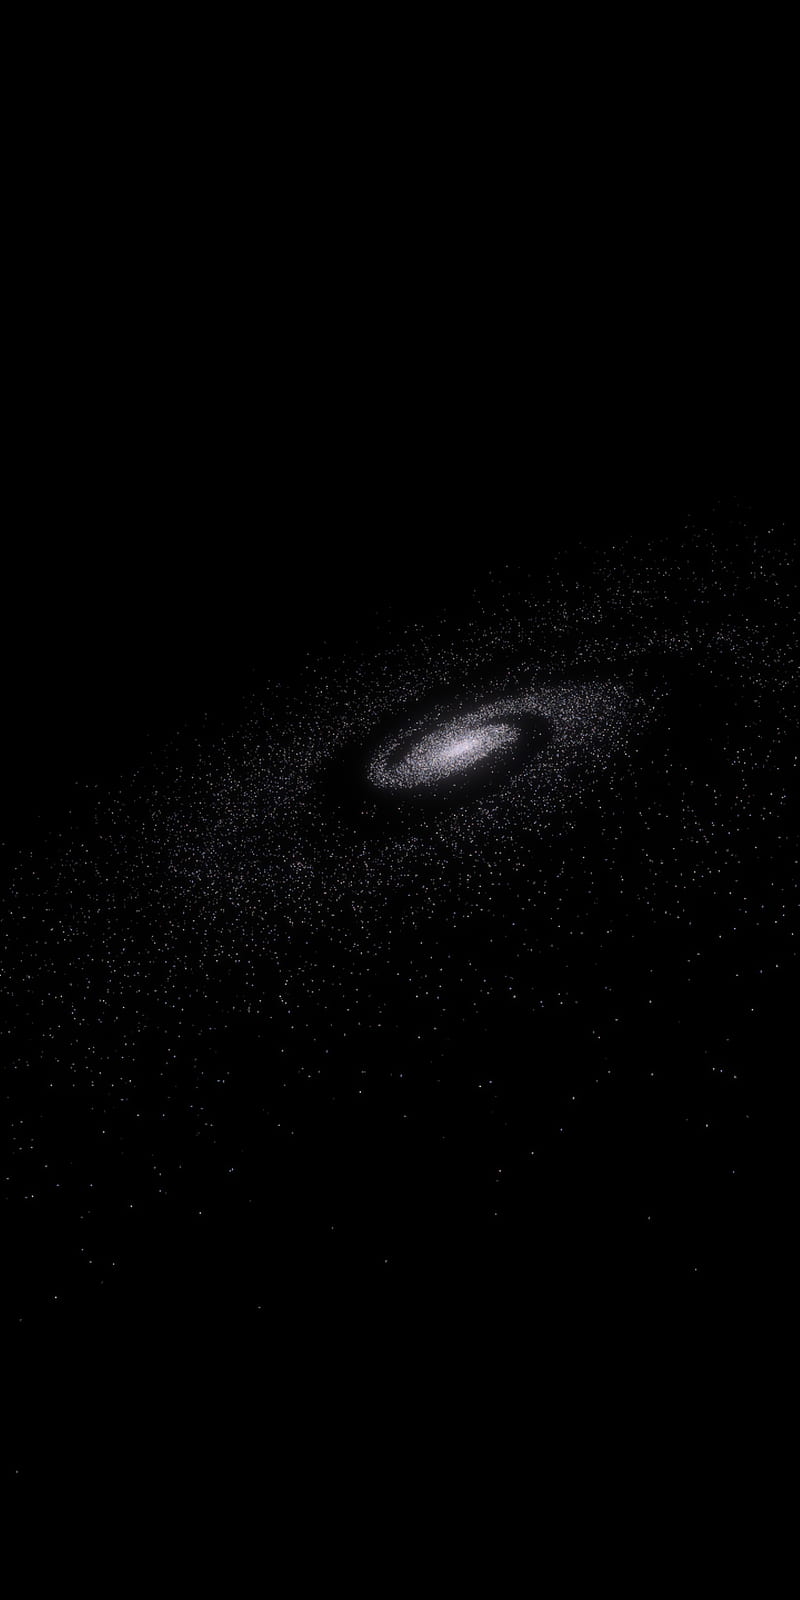 Black Hole In Cosmos Live Wallpaper